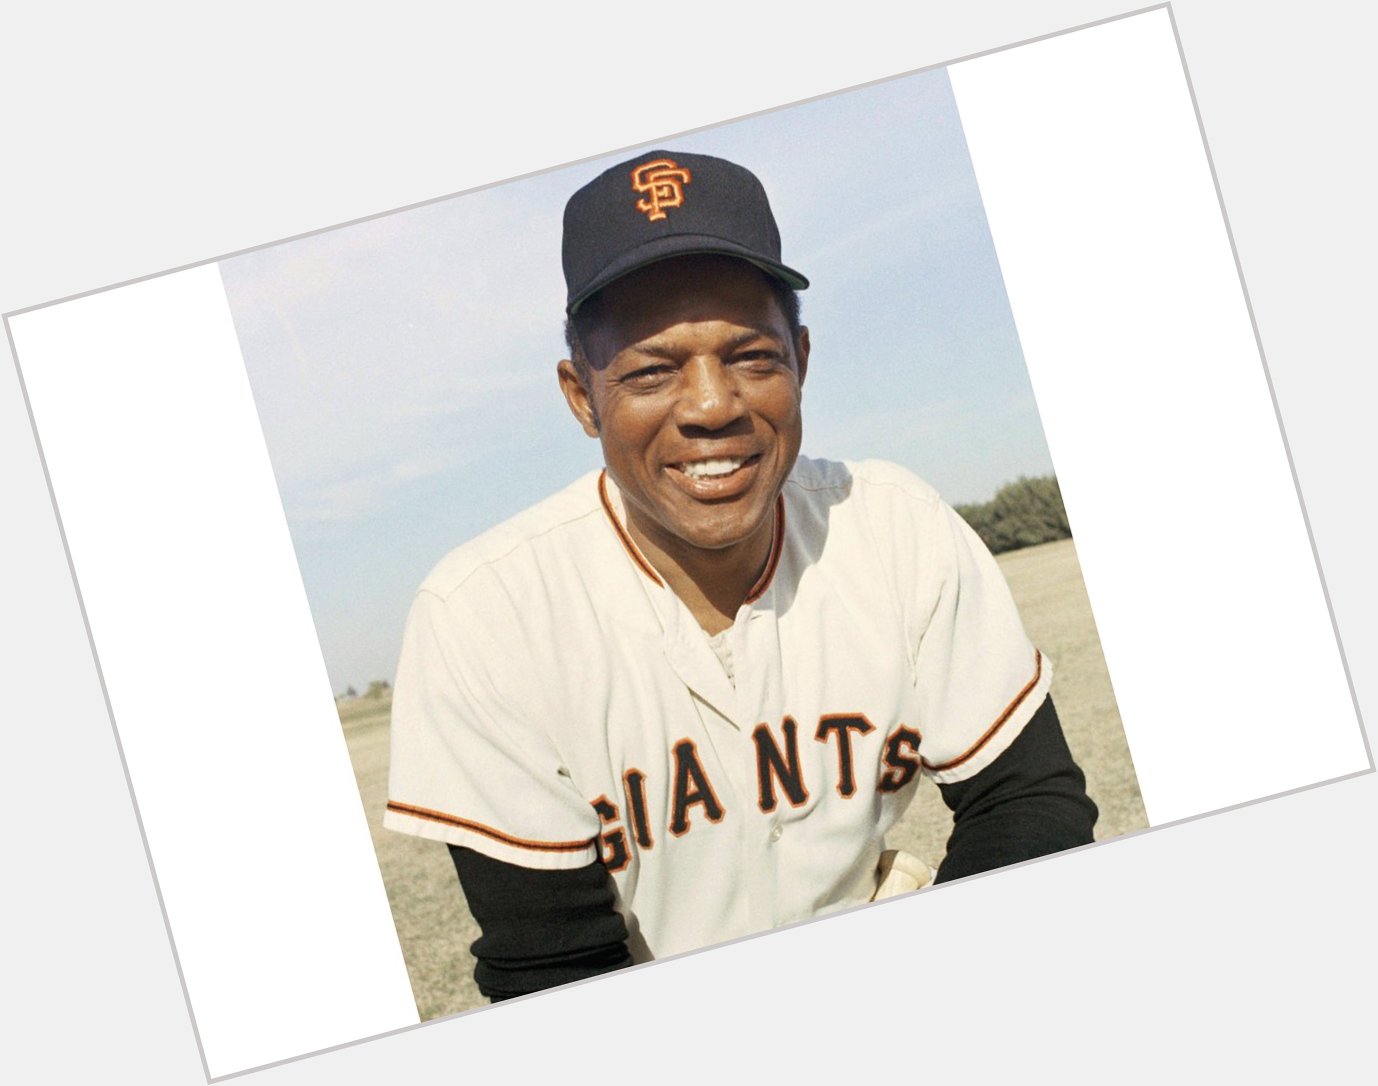 Happy 89th birthday to the greatest living ball player, Willie Mays! 